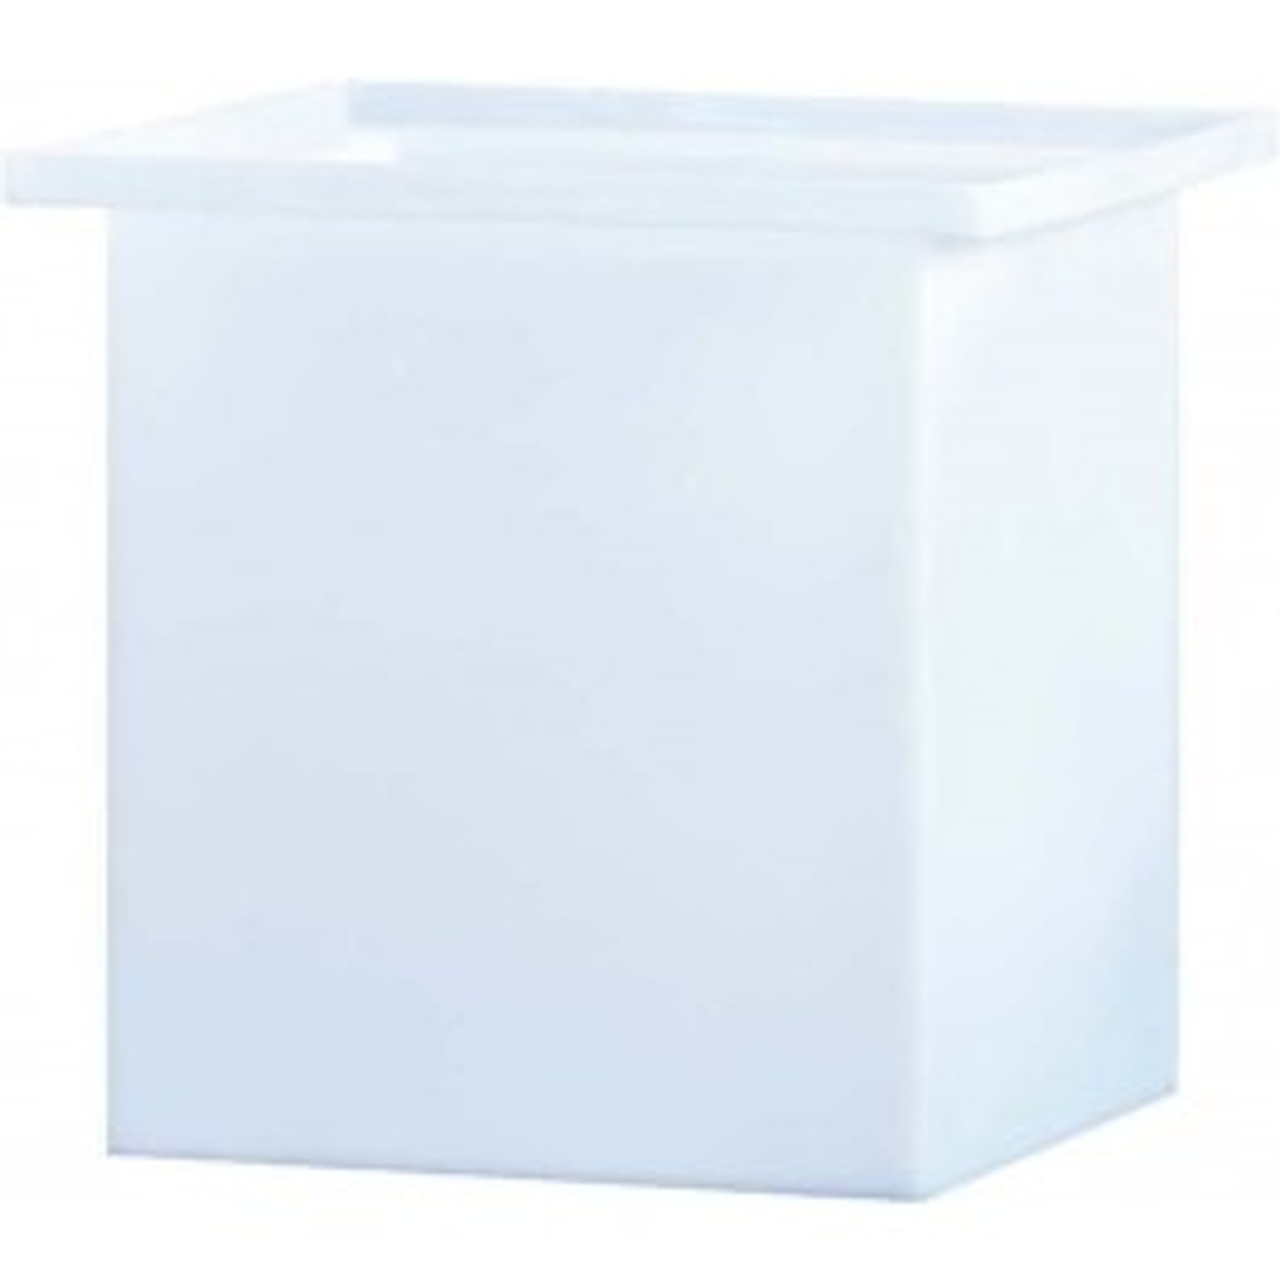 An image of a 185 Gallon PE Chem-Tainer White Rectangular Open Top Tank | R363636A